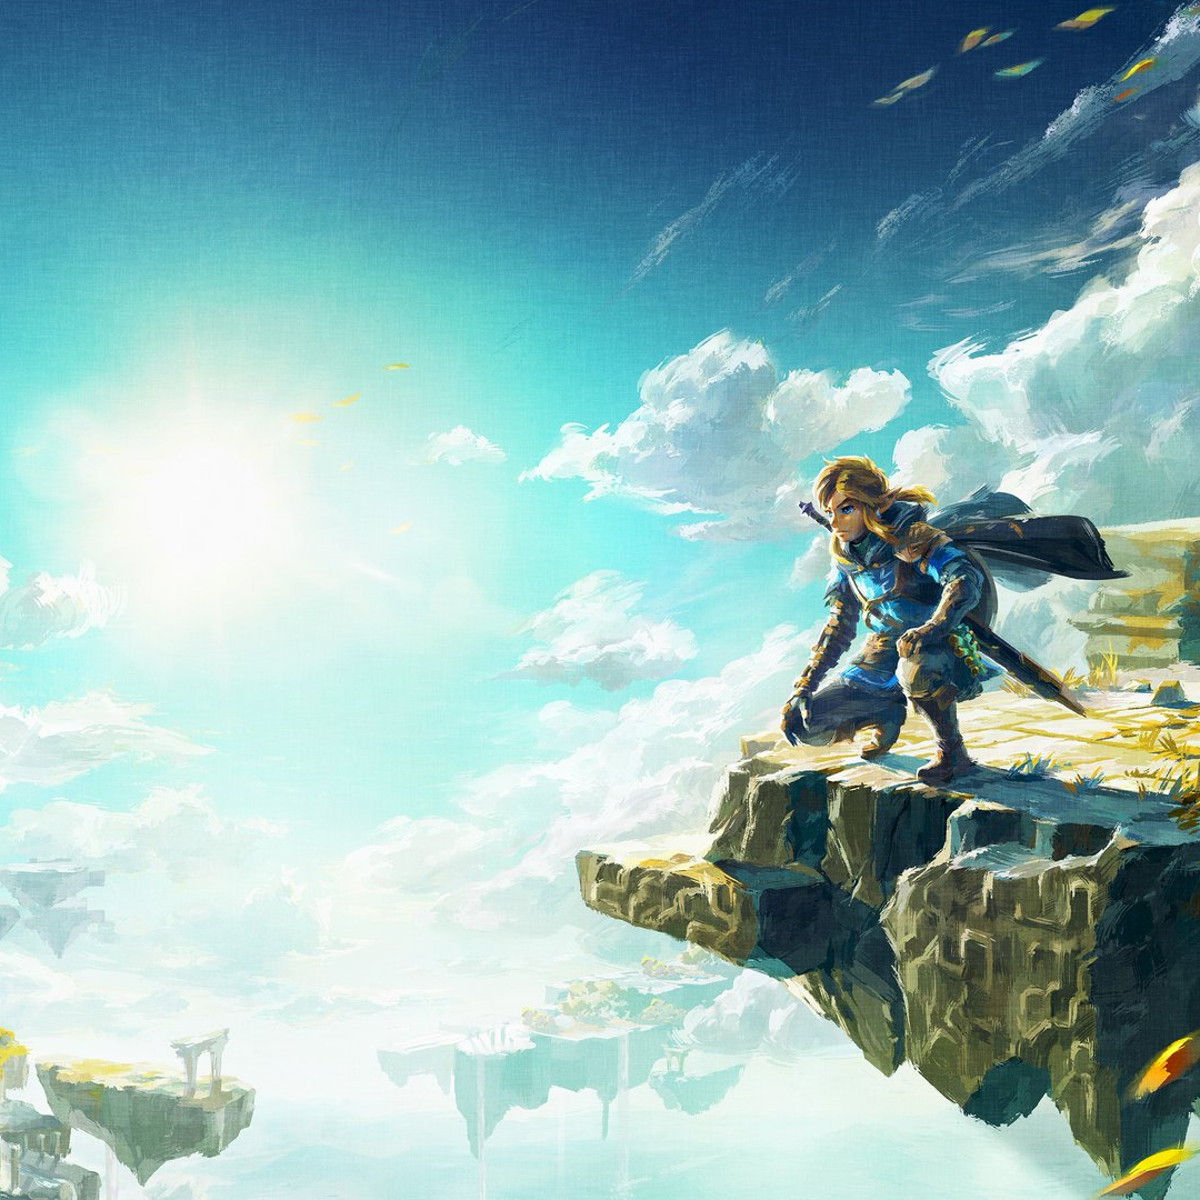 Breath of the Wild and Zelda: Tears of the Kingdom are the new format for the series